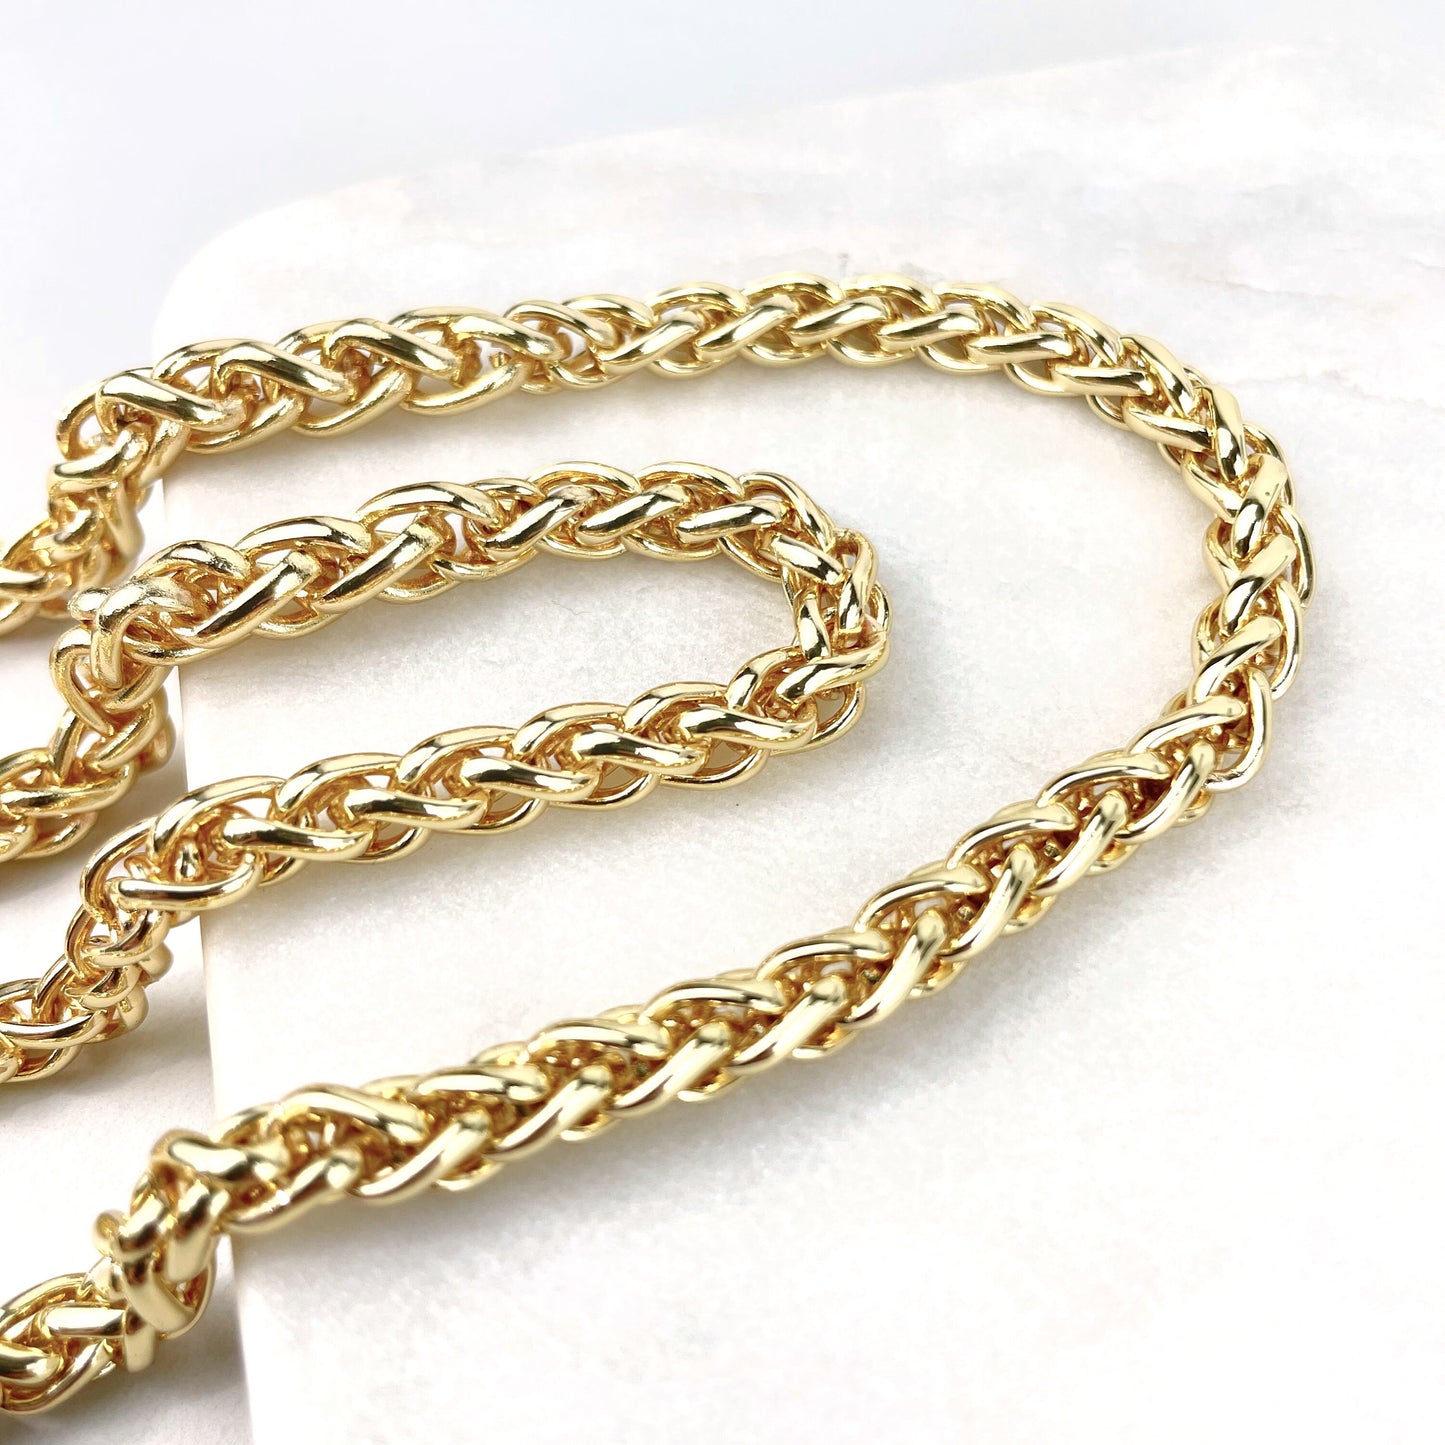 18k Gold Filled 6mm Curb Link Chain, 18 or 24 Inches, Lobster Claw Wholesale Jewelry Making Supplies